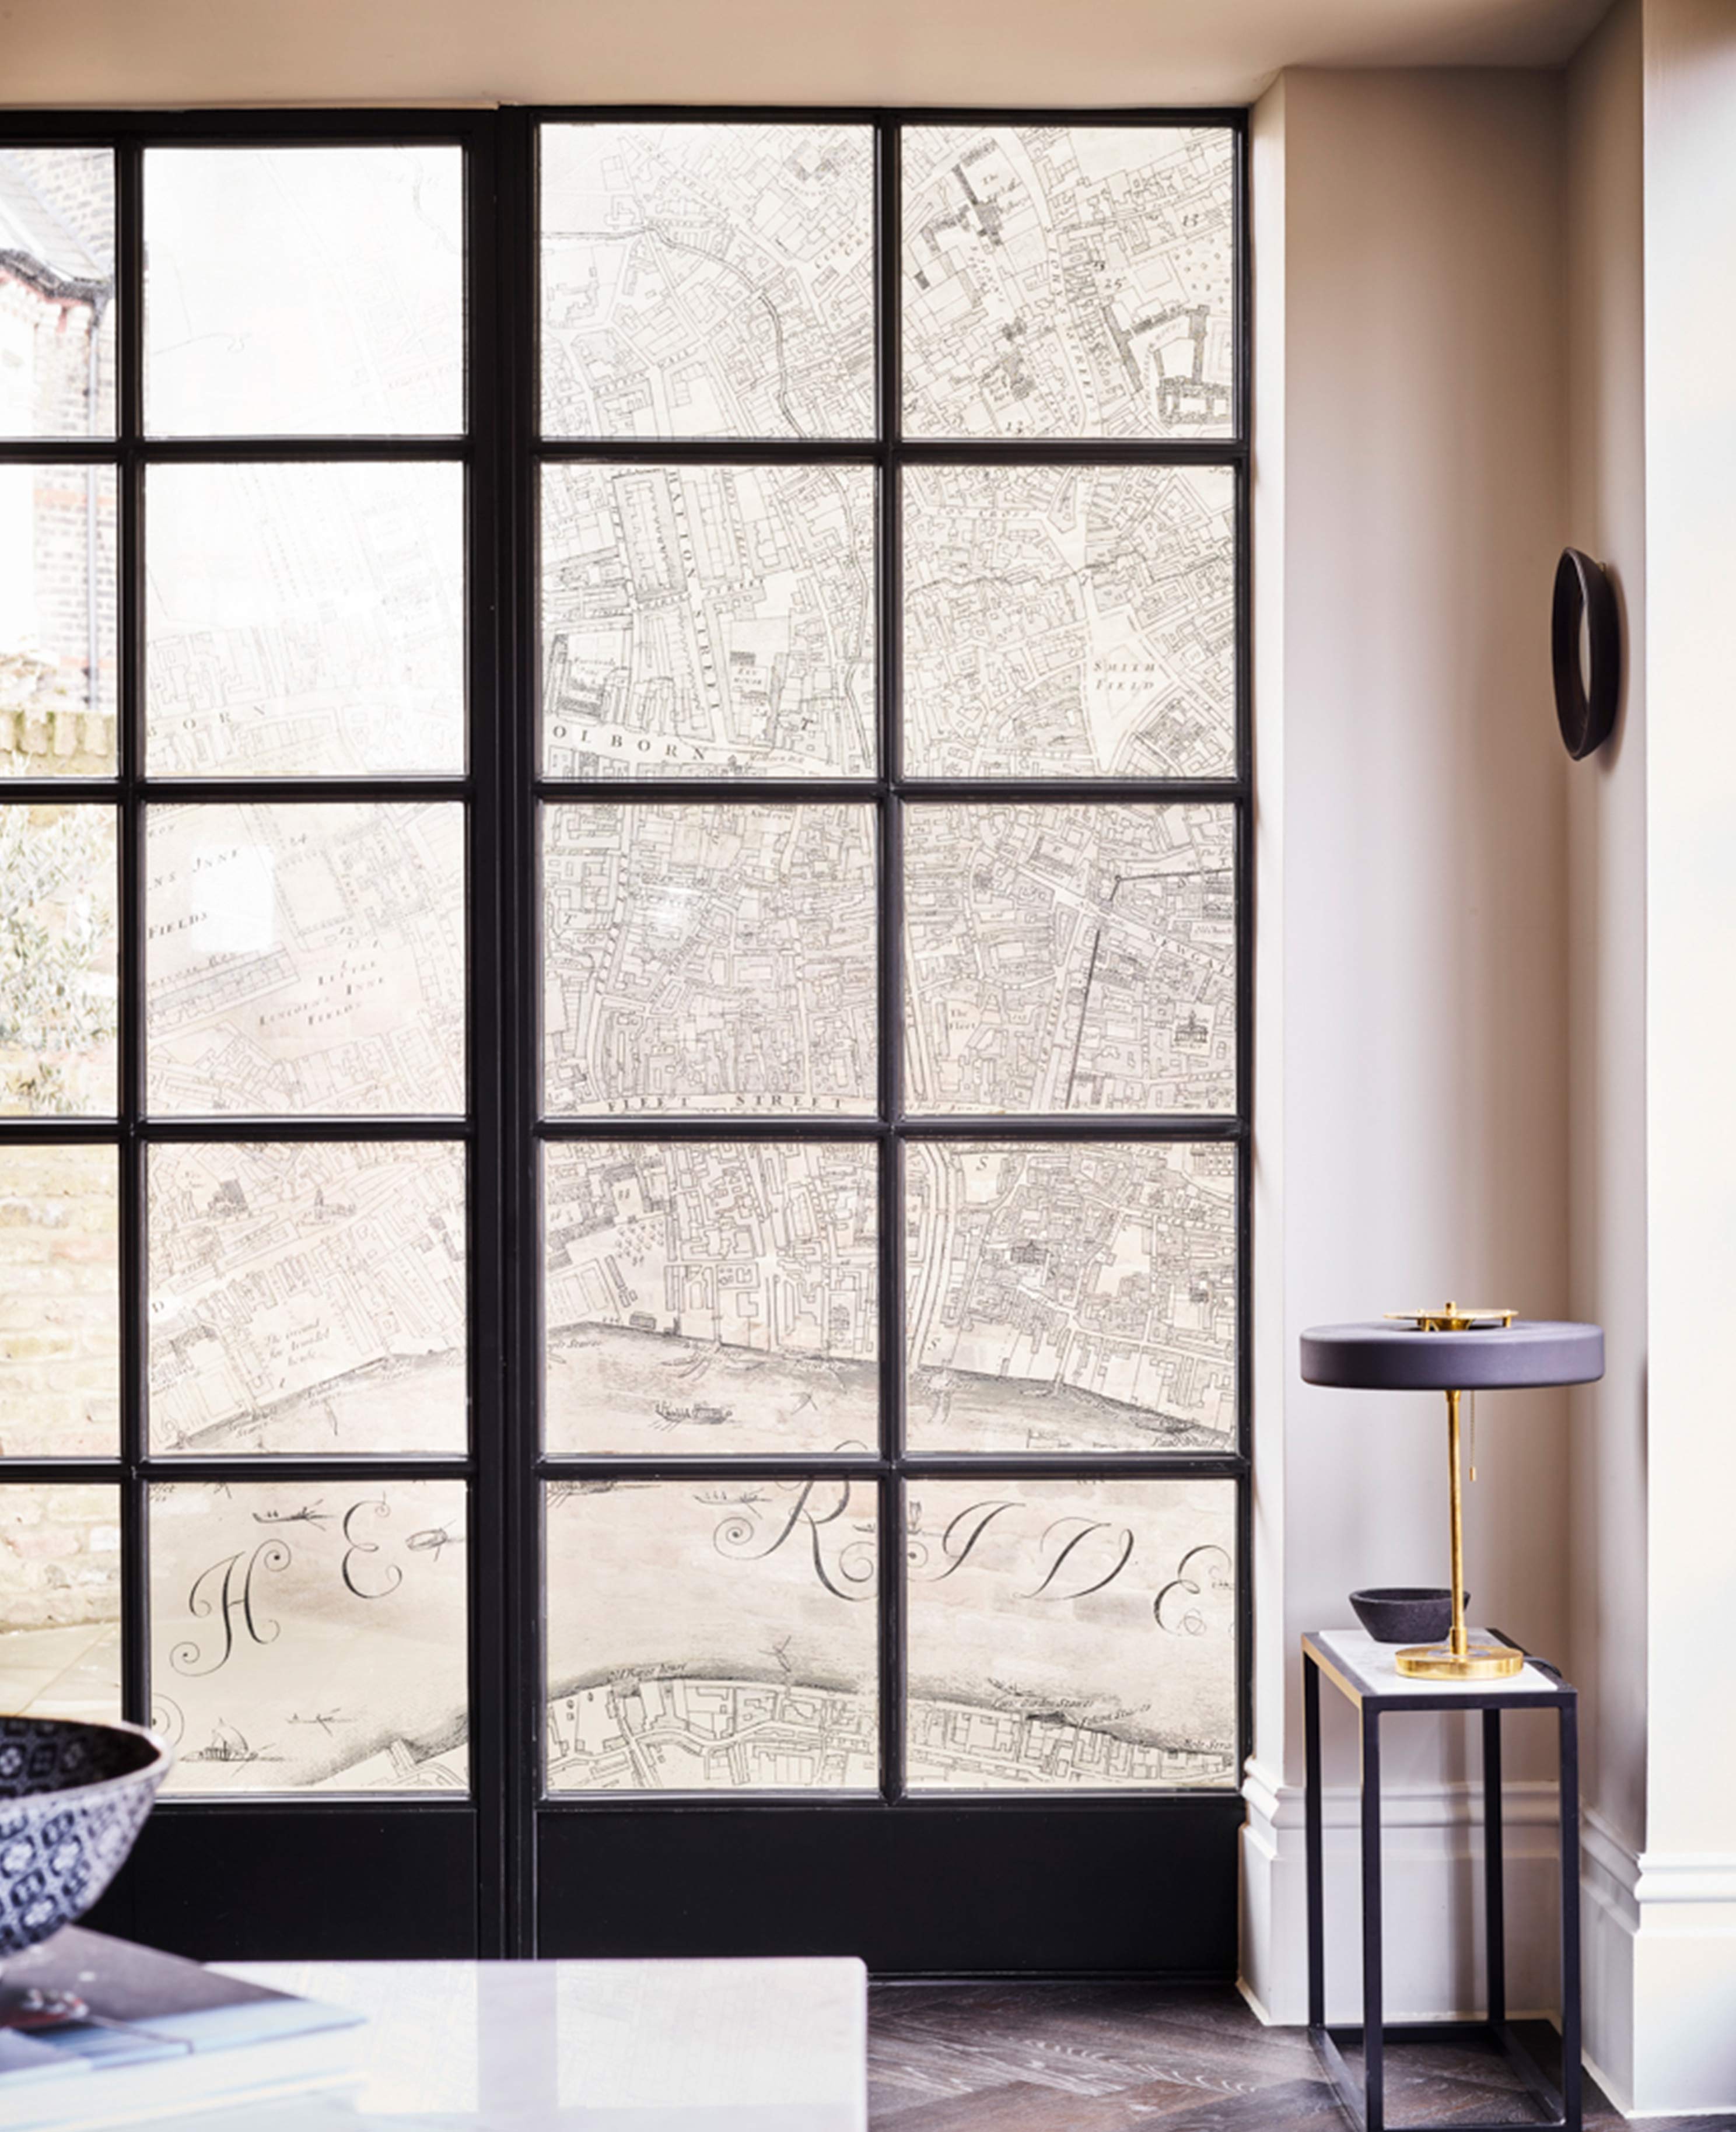 How to Apply a Decorative Window Film